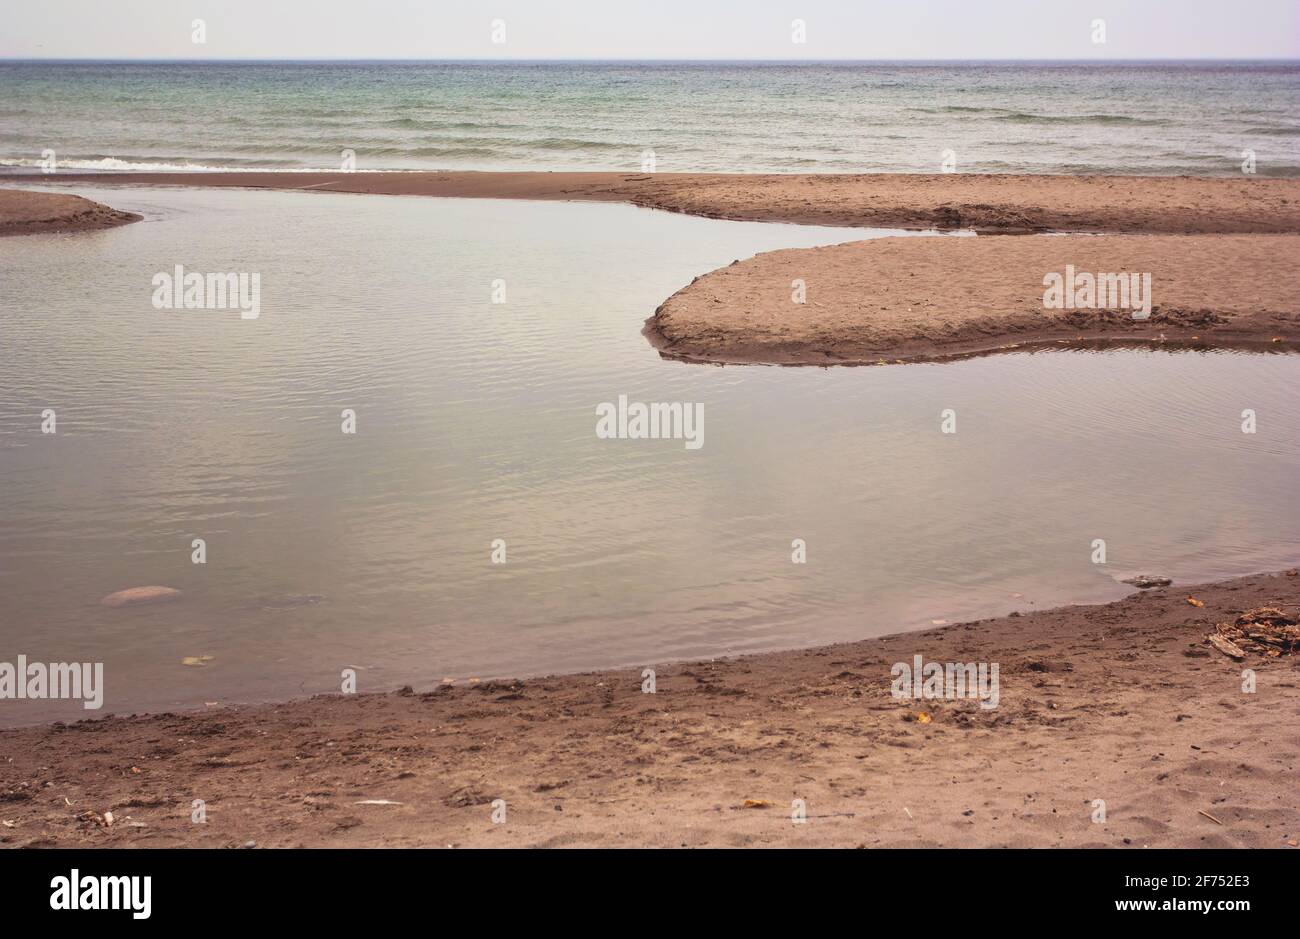 Calm waters on a beach under a cloudy sky in Toronto, Ontario, Canada. Stock Photo